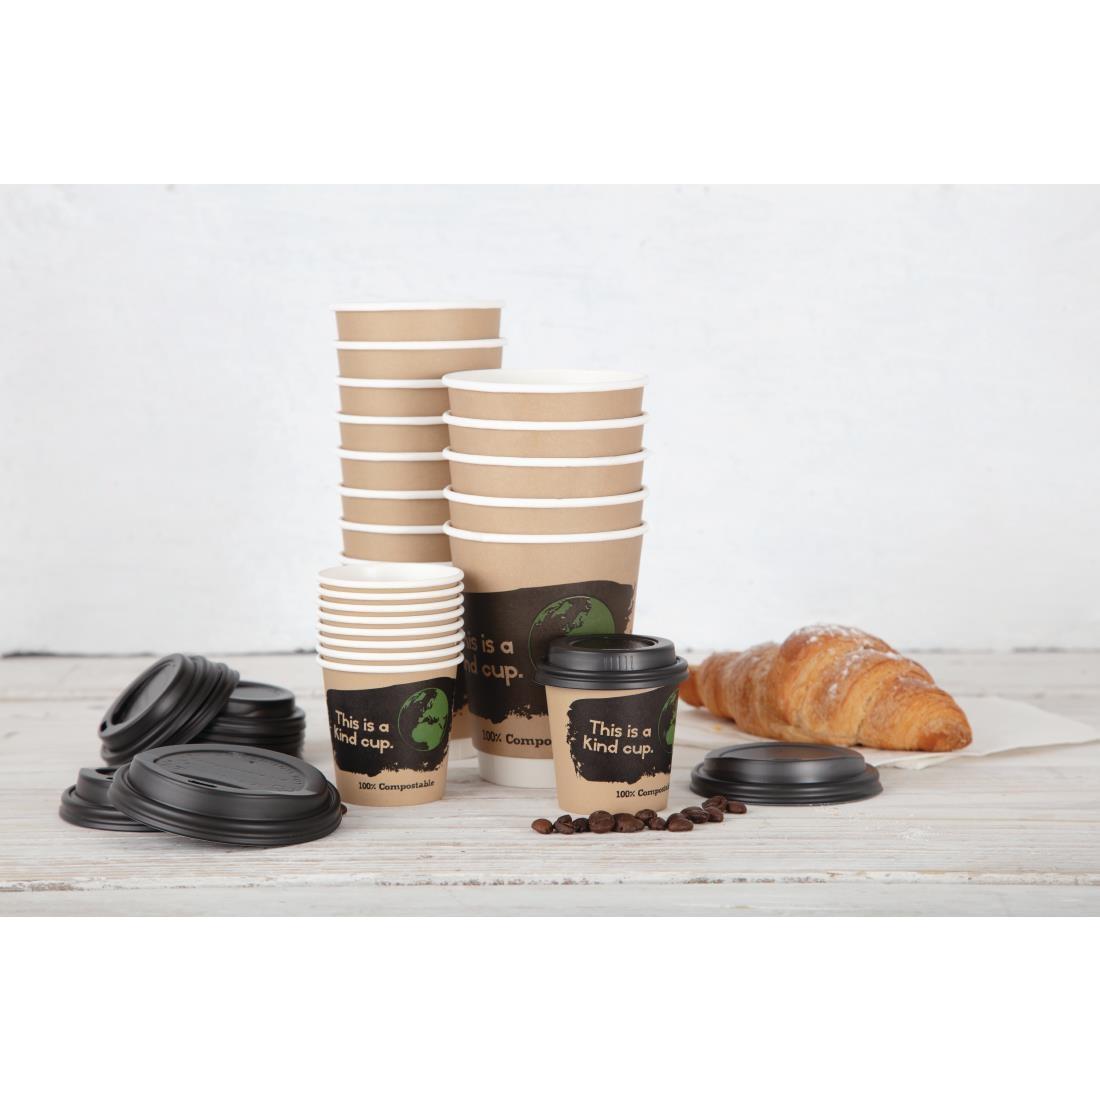 Fiesta Compostable Coffee Cups Double Wall 227ml / 8oz (Pack of 25) - DY984  - 7